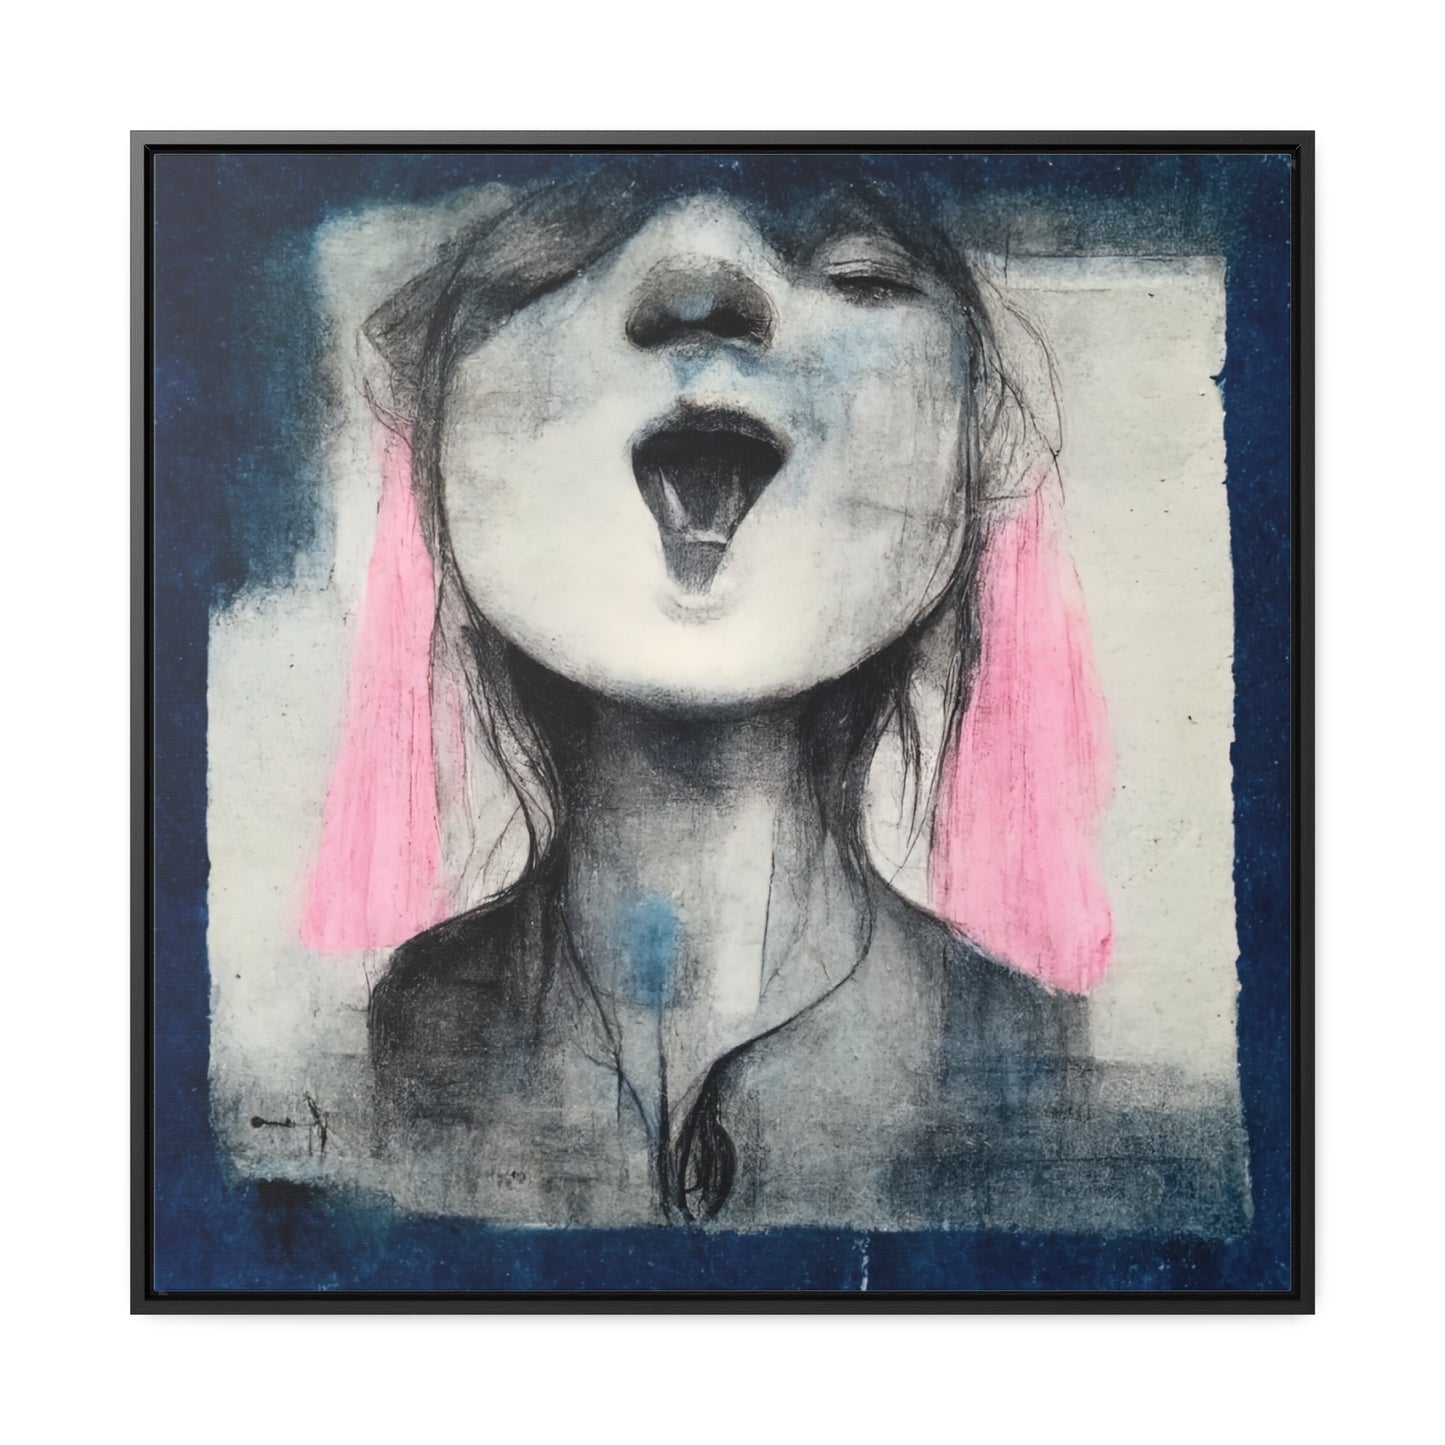 Girls from Mars 8, Valentinii, Gallery Canvas Wraps, Square Frame